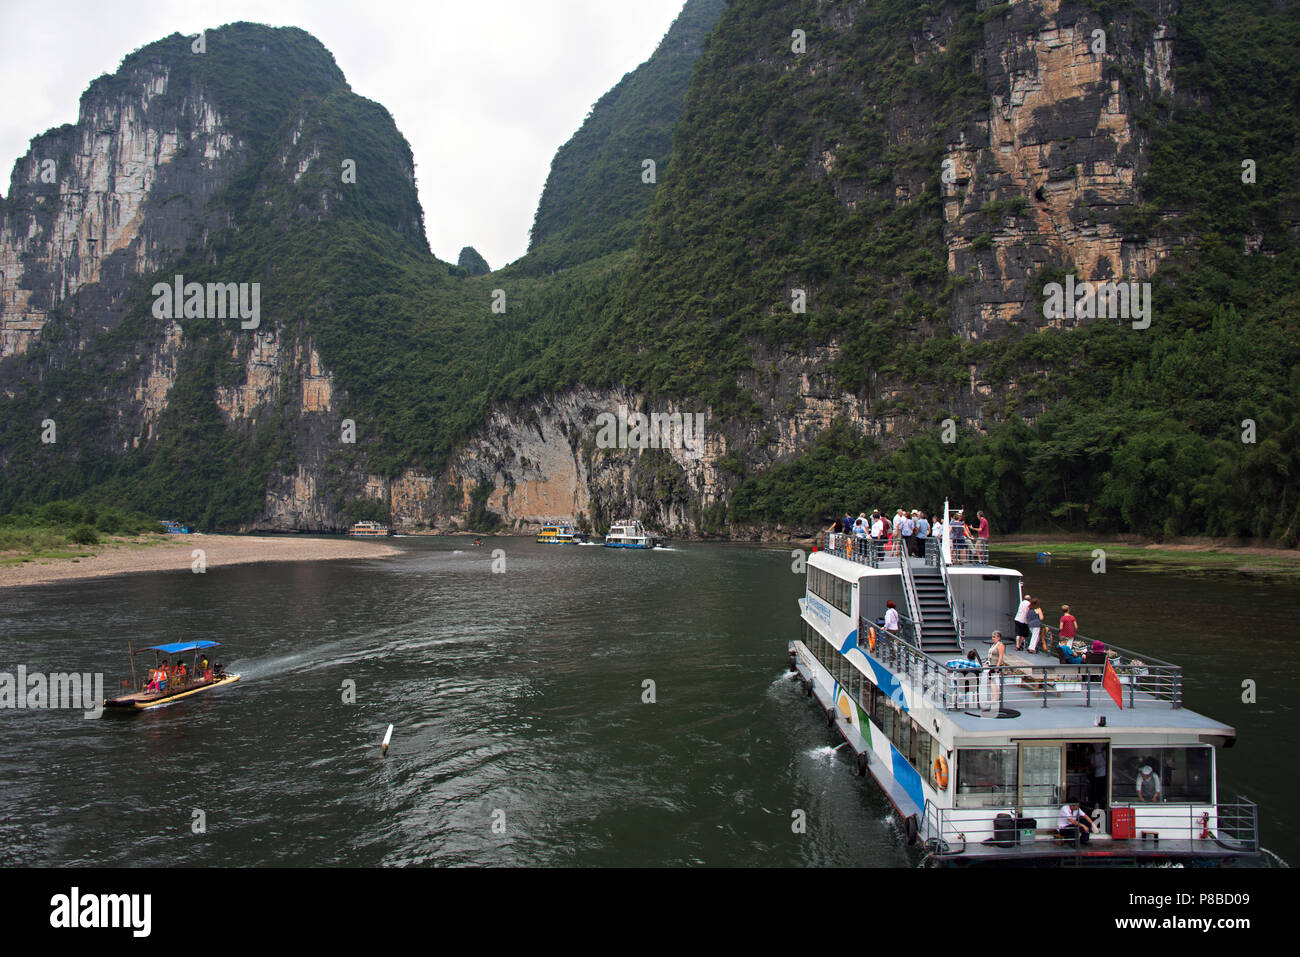 River cruise on the Li River in Guangxi Zhuang china, on the journey from Guilin to Yangshuo. Stock Photo